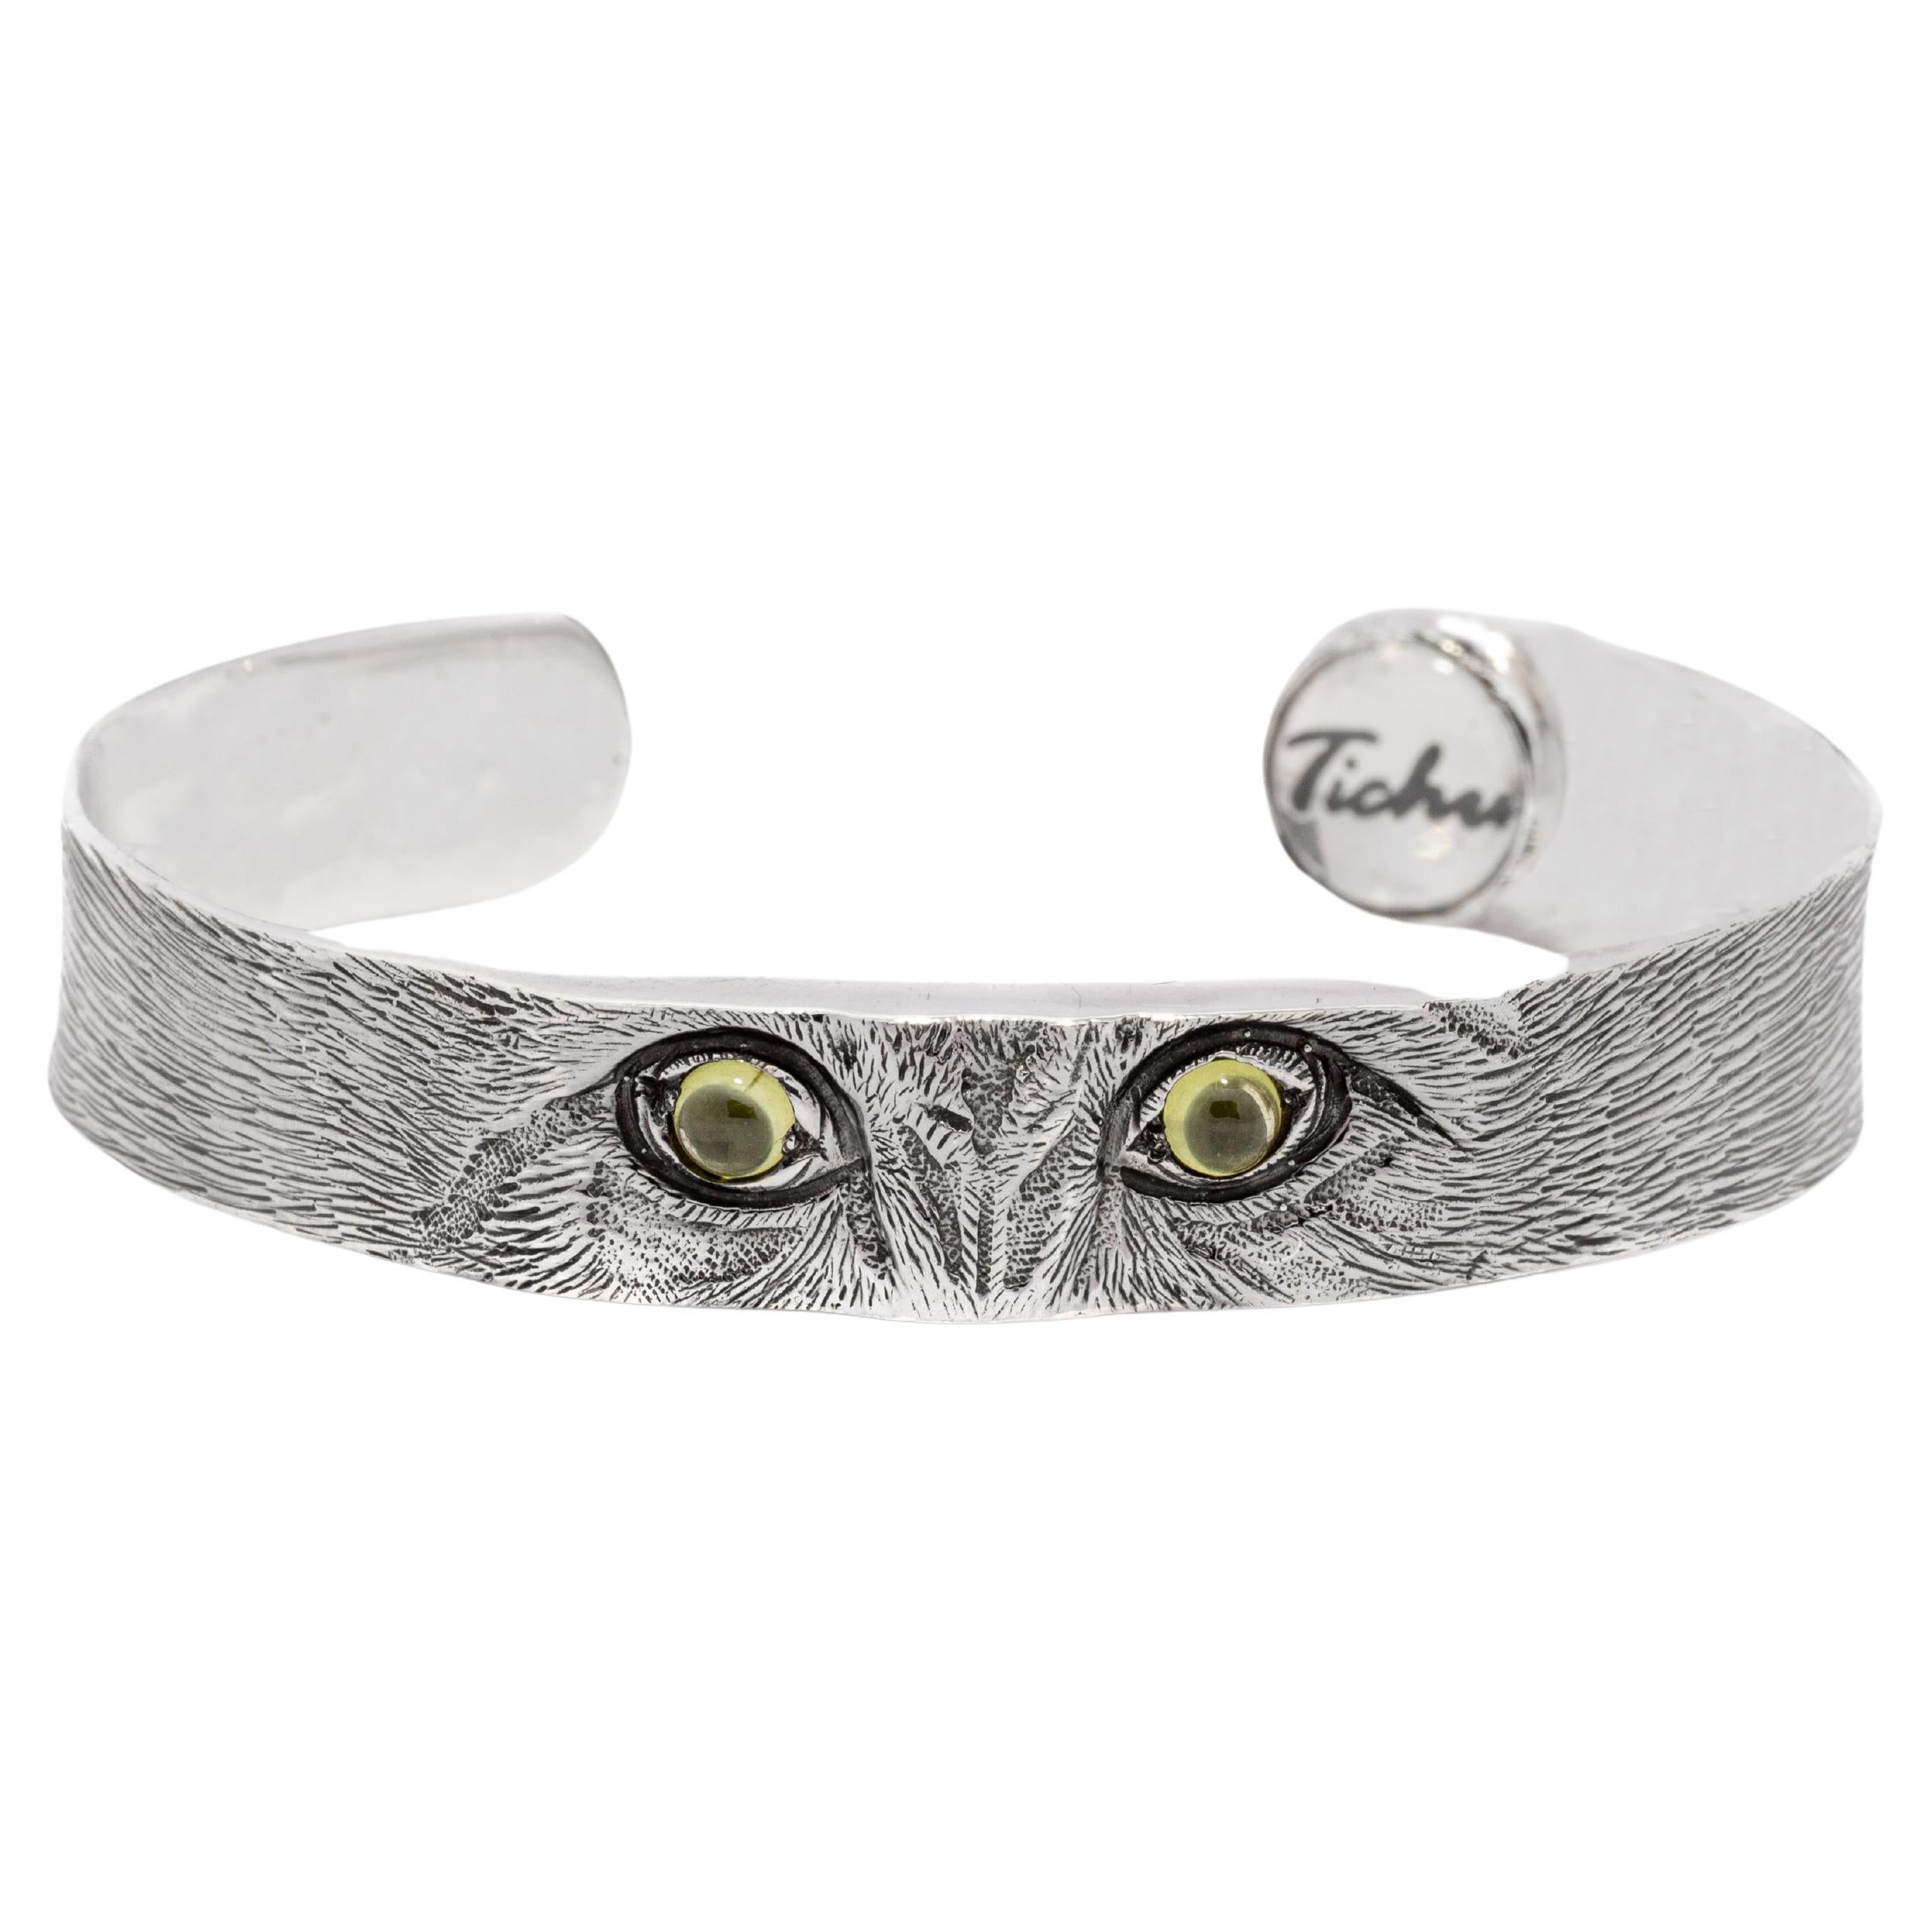 Tichu Peridot Cat Eyes Cuff in Sterling Silver and Crystal Quartz 'Size L' For Sale